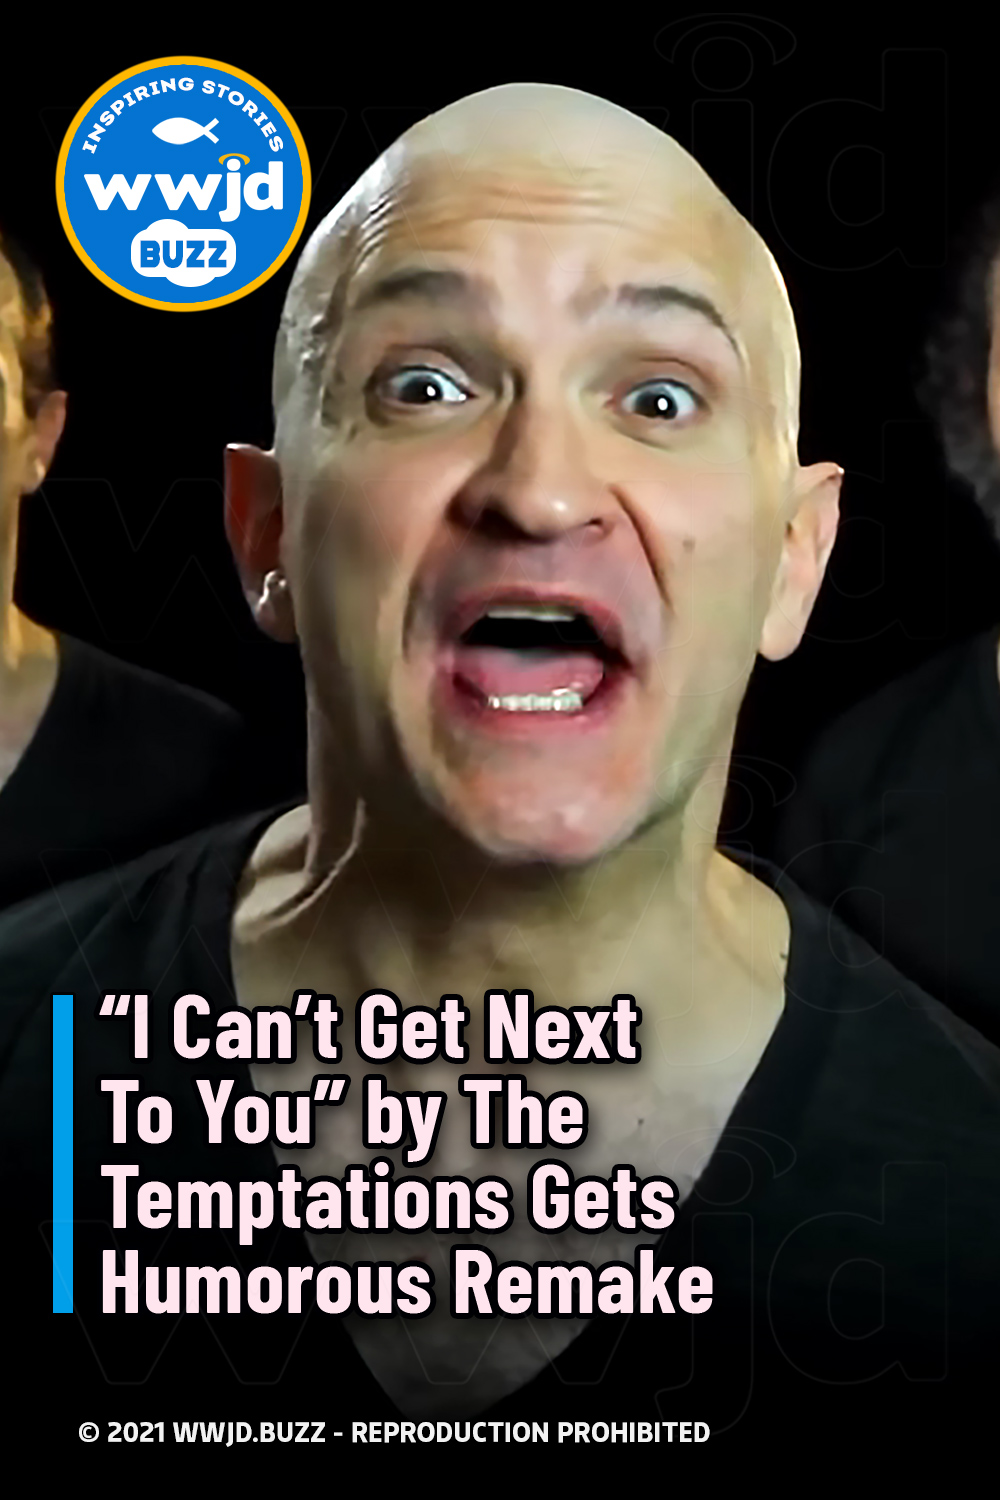 “I Can’t Get Next To You” by The Temptations Gets Humorous Remake